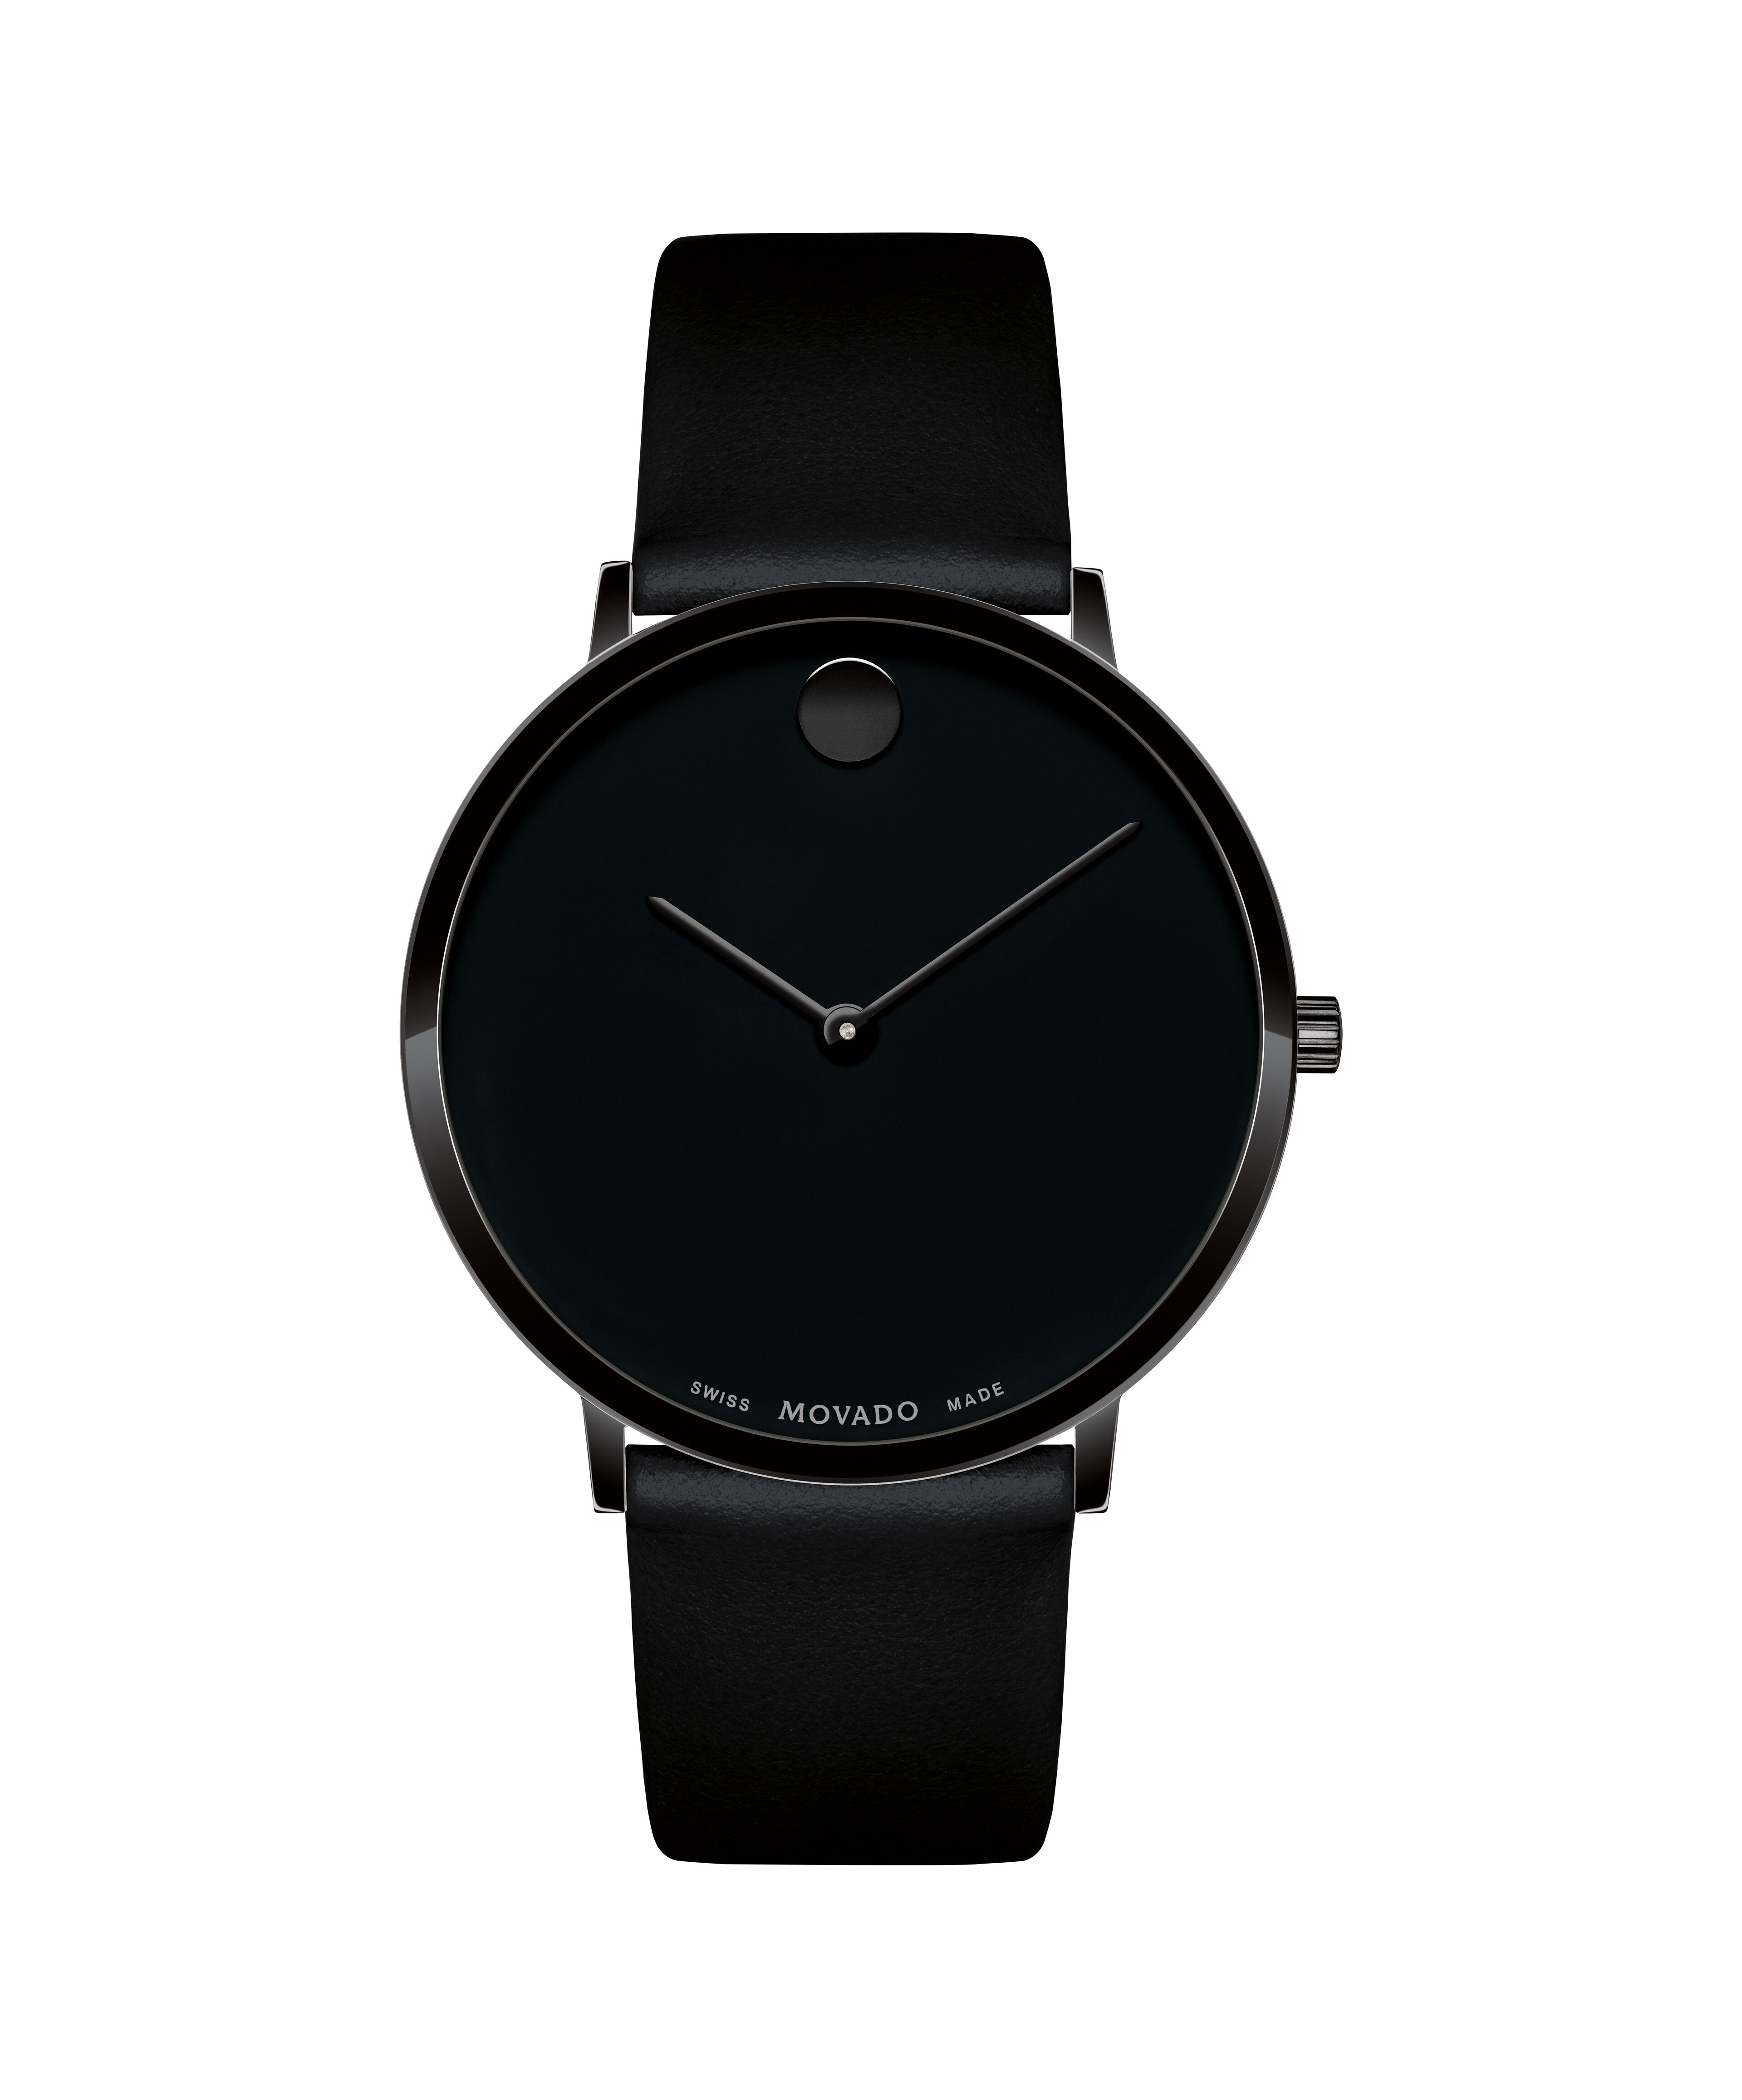 Movado Men's Movado Gold-Tone Watch with Black Museum DialMovado Men's Movado Luno Sport Museum Watch with Black Dial - 606536